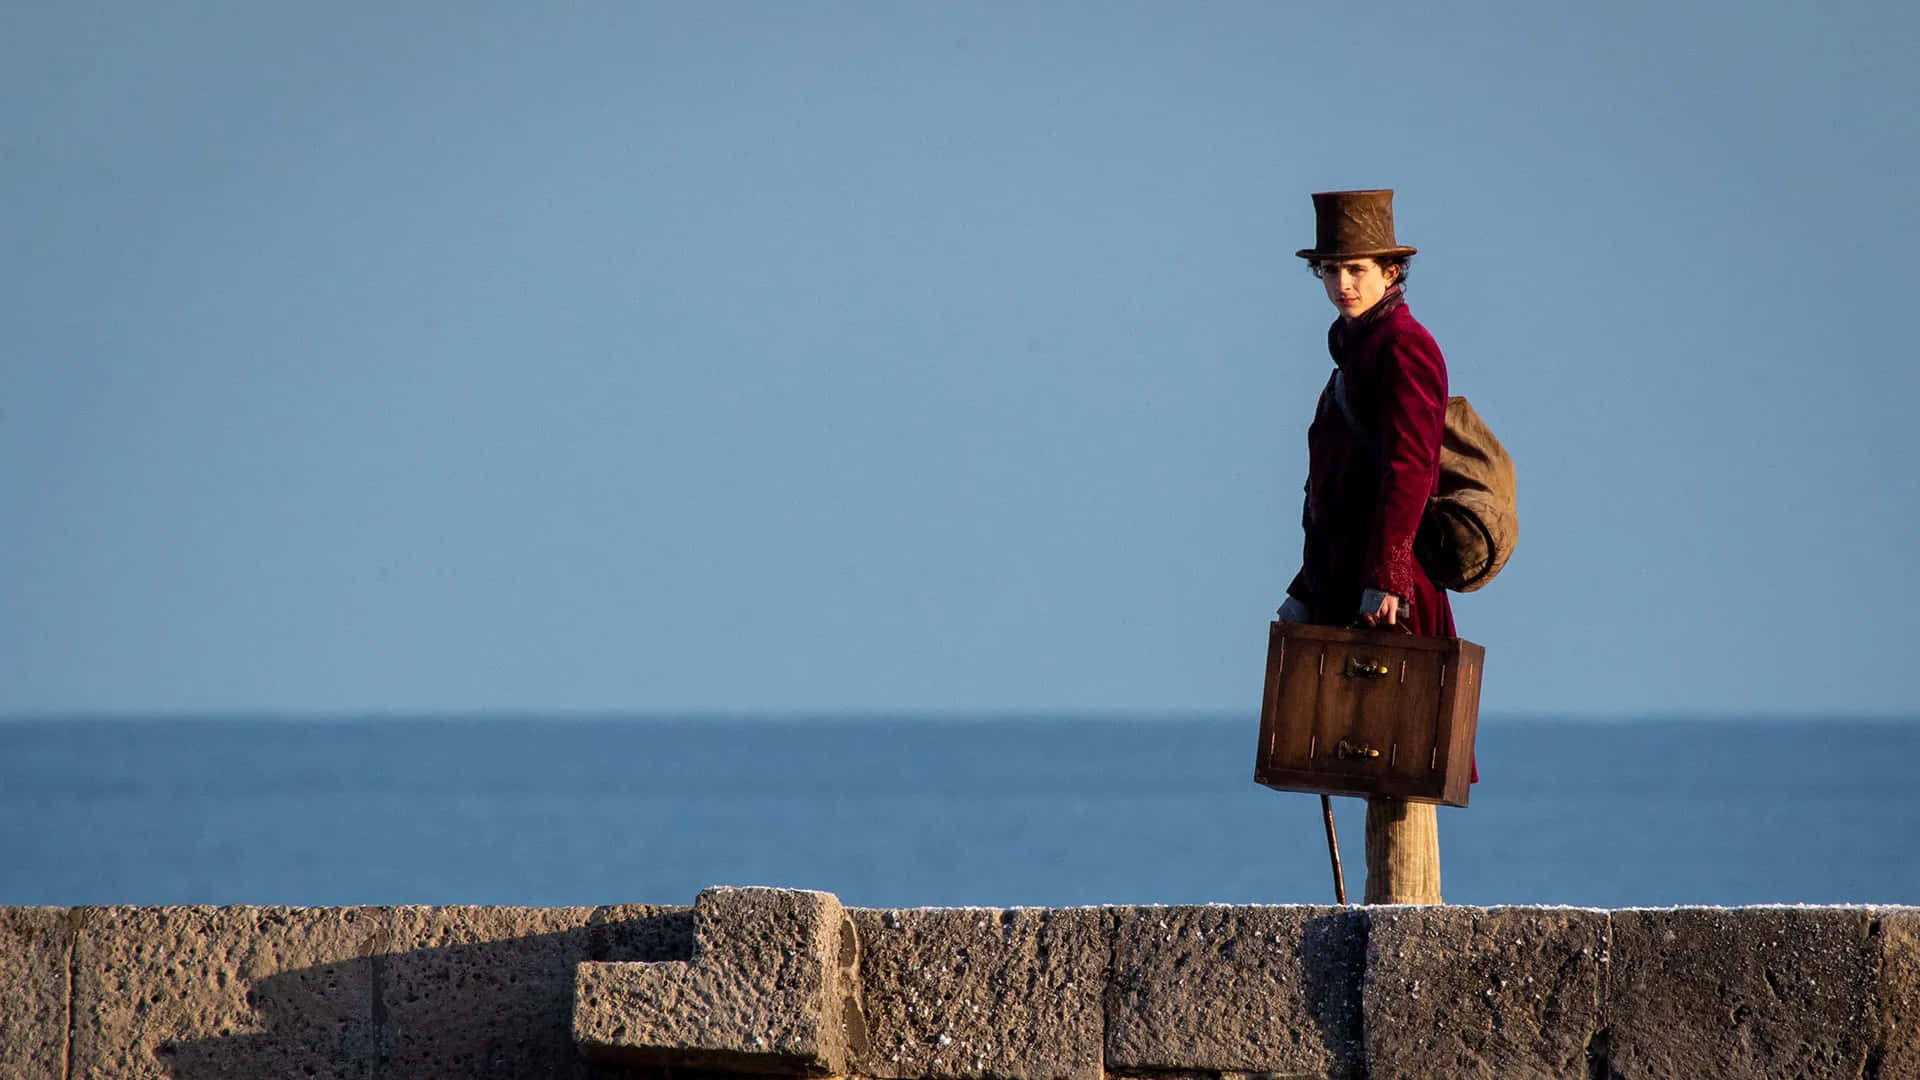 A Man Is Standing On A Wall With A Suitcase